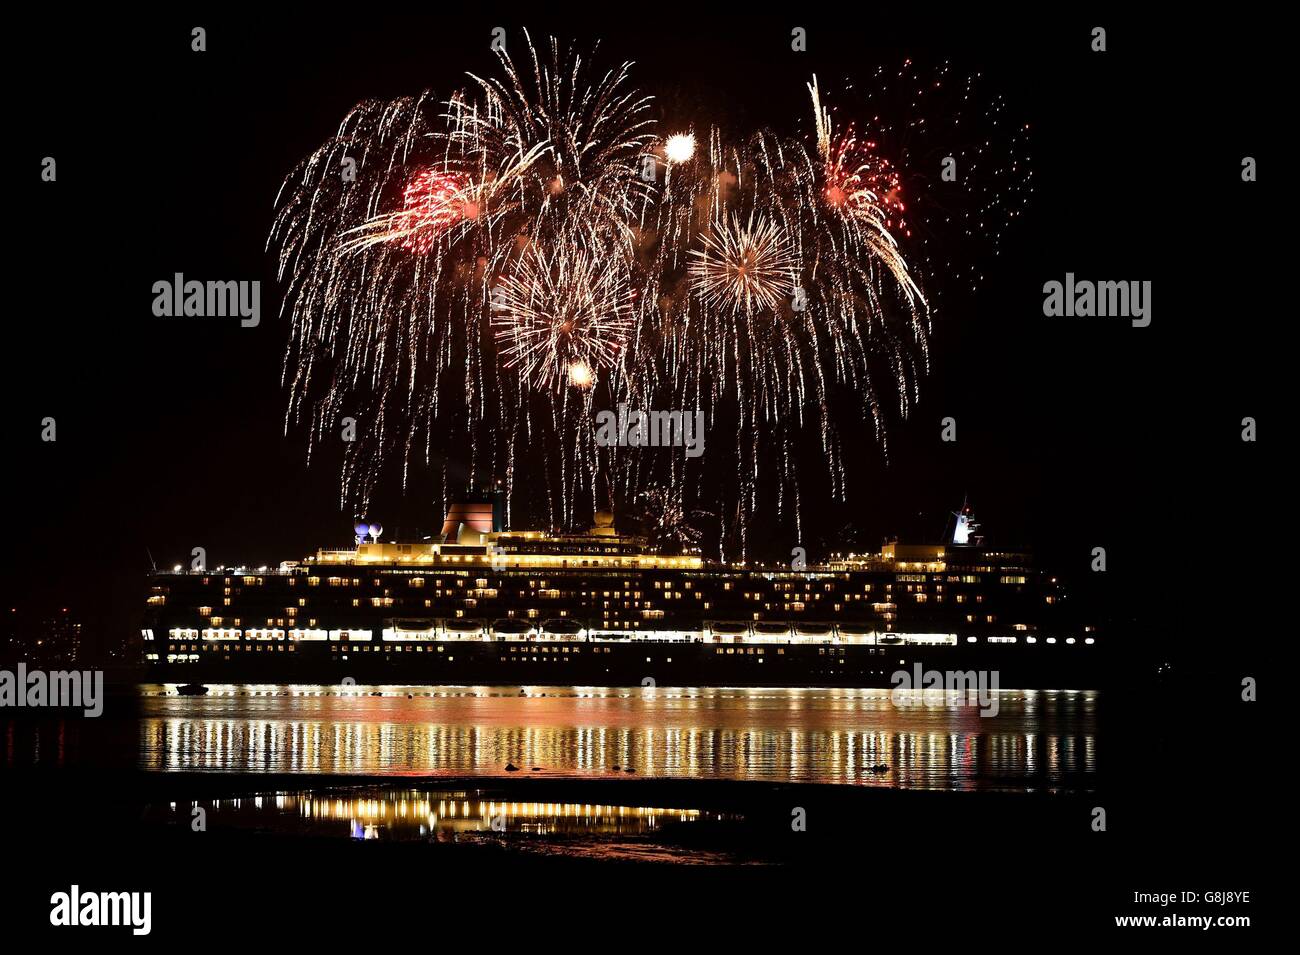 Fireworks are let off as Cunard's Queen Elizabeth, one of the Three Queens liners, makes her way down Southampton water into the River Solent on her first world voyage of 2016. Stock Photo